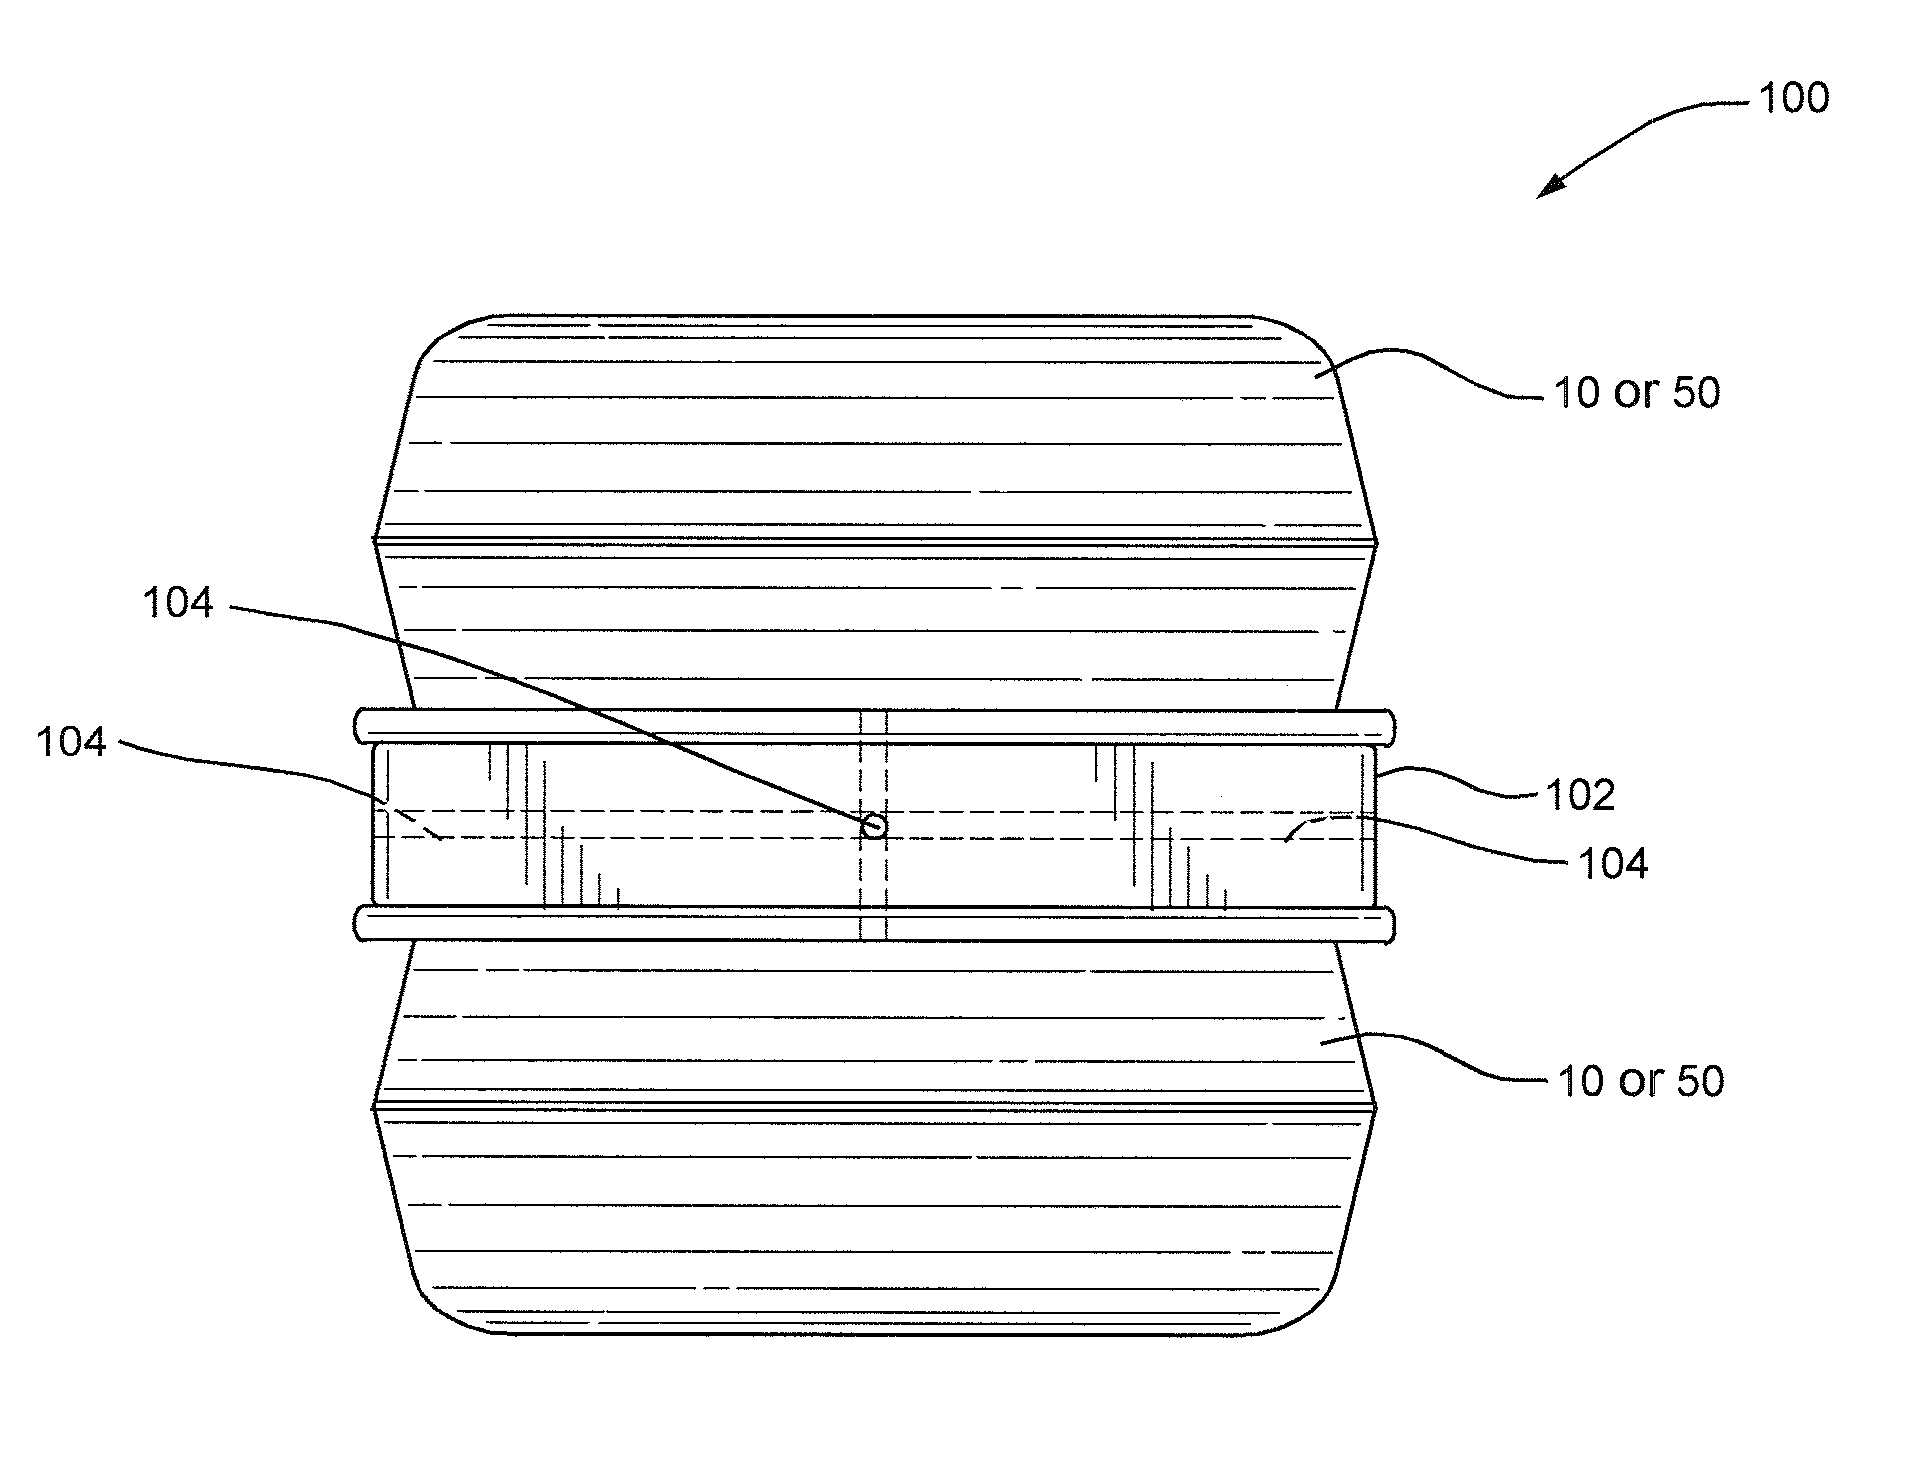 Protective structure and method of making same